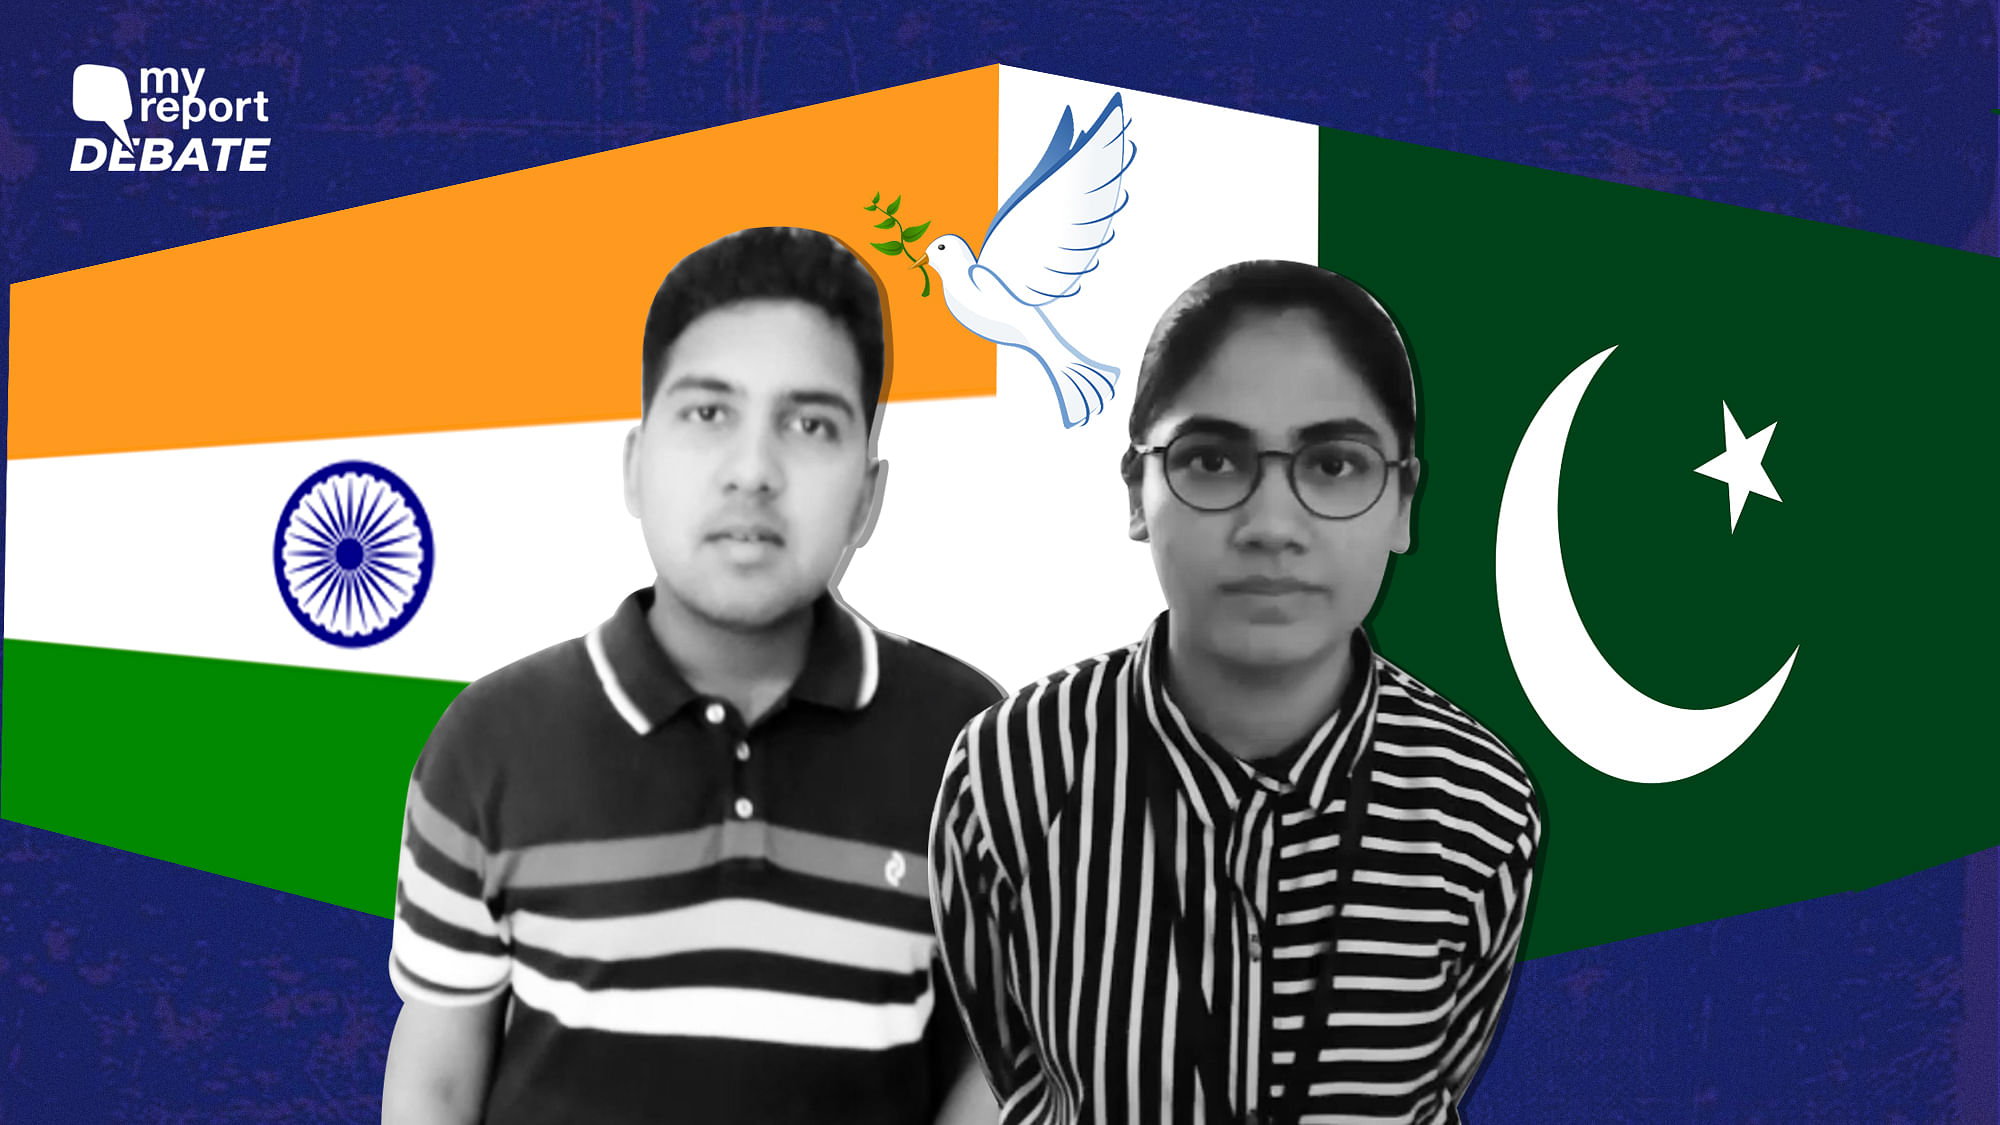 Youth from Pakistan, weigh in on the best way to to improve relations between India and Pakistan.